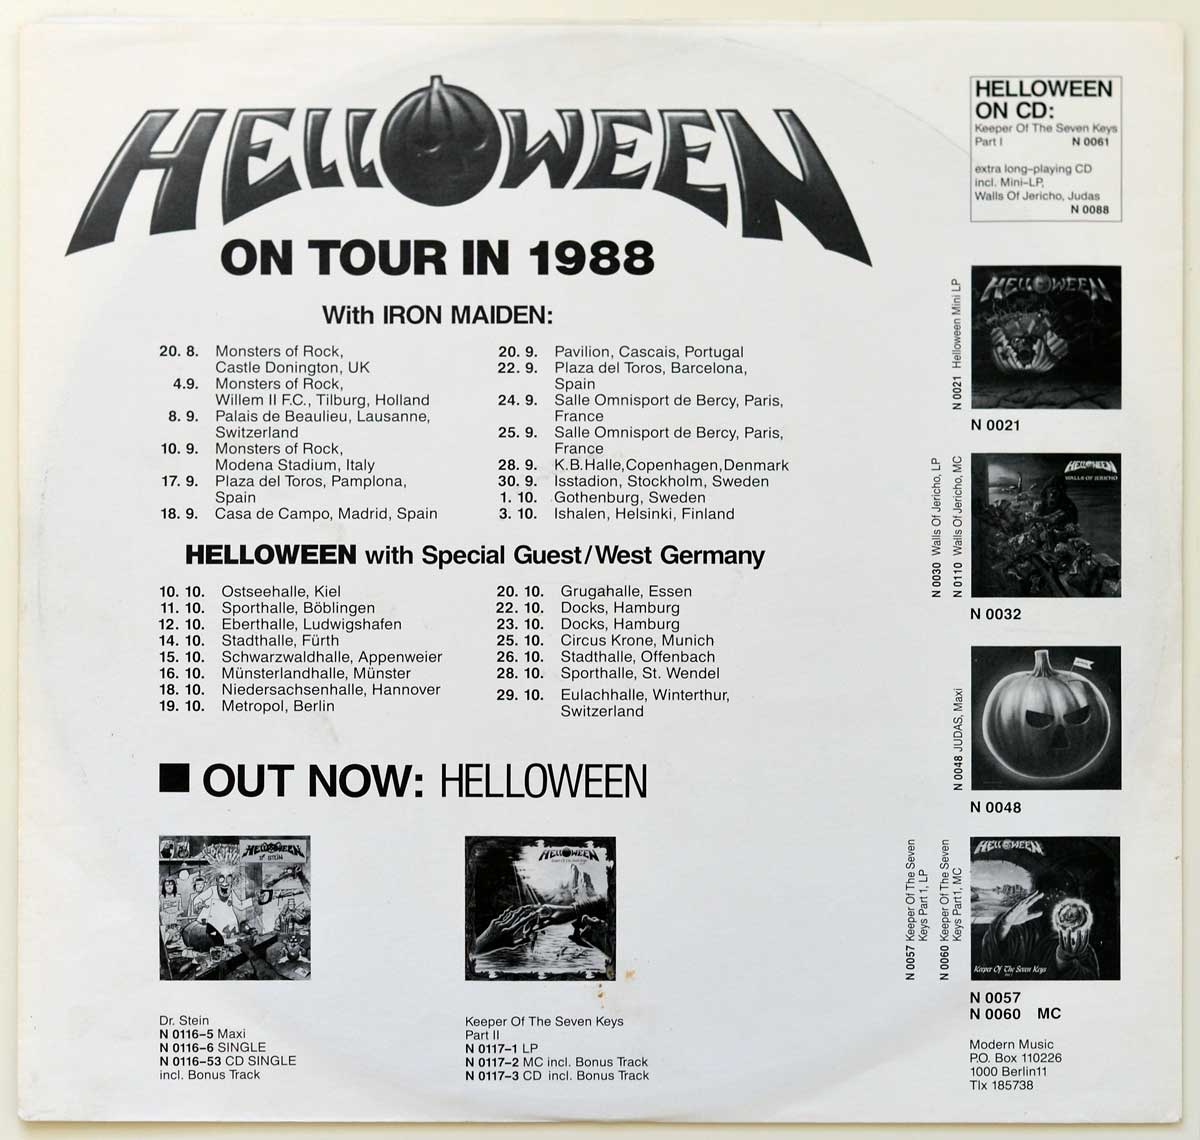 Photo of album back cover HELLOWEEN - Keeper Of The Seven Keys Part II  